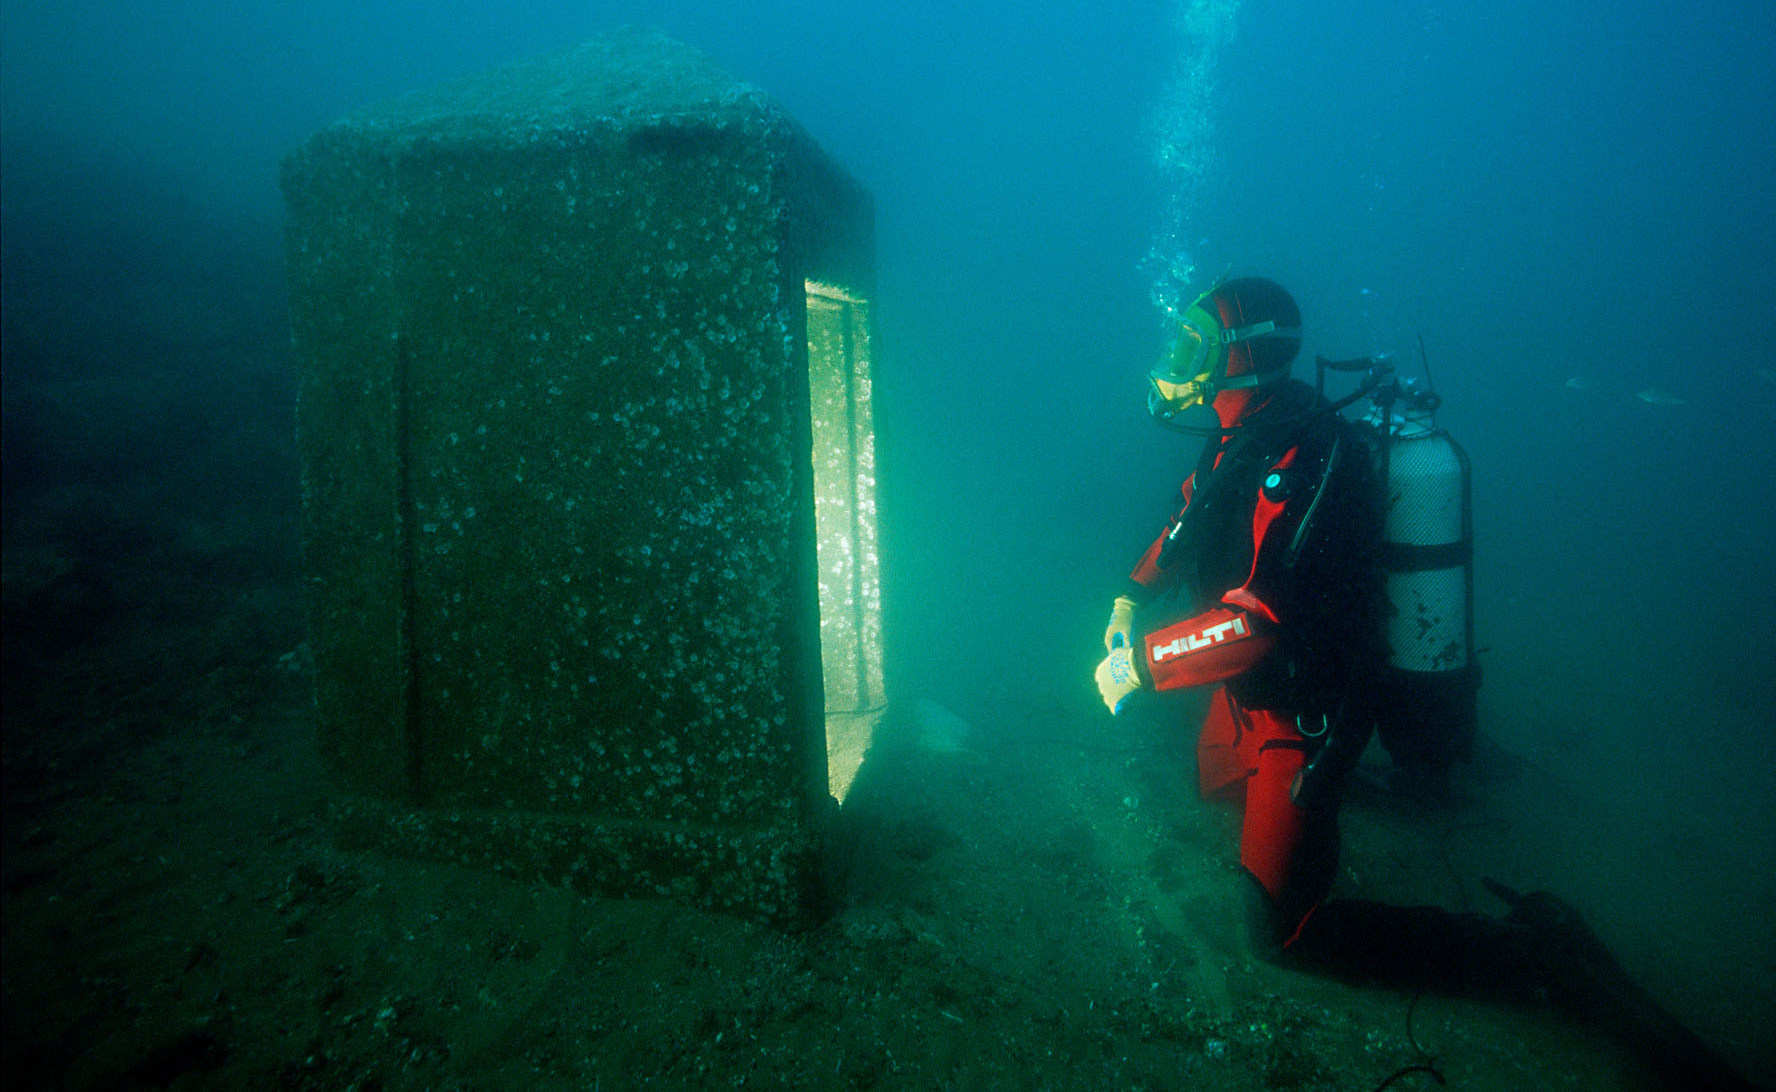 Groundbreaking Discoveries Made in Underwater Ancient Egyptian Cities of Heracleion and Canopus